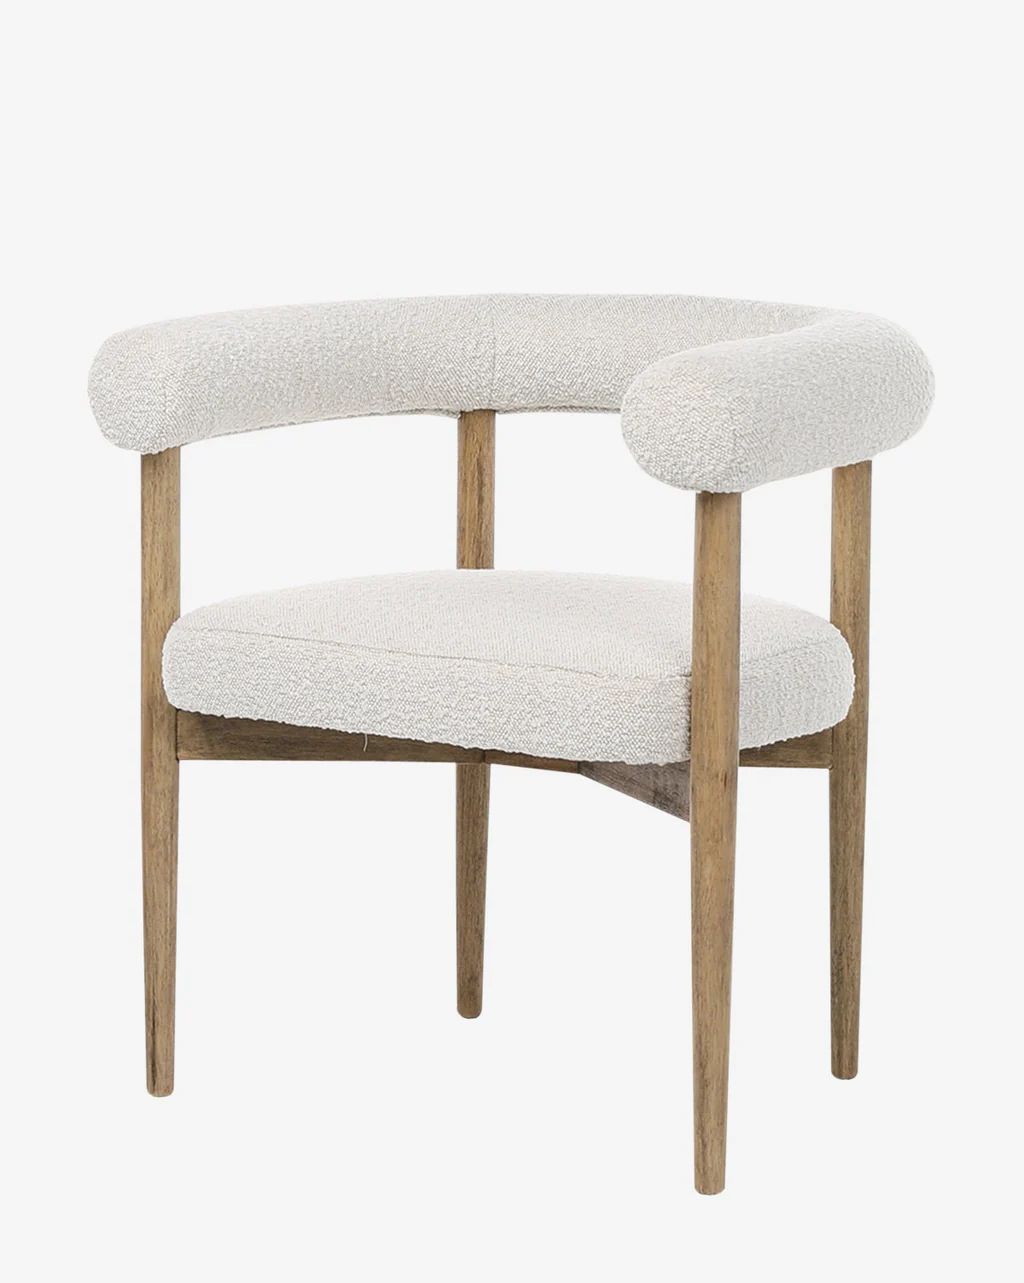 Melvina Dining Chair | McGee & Co.